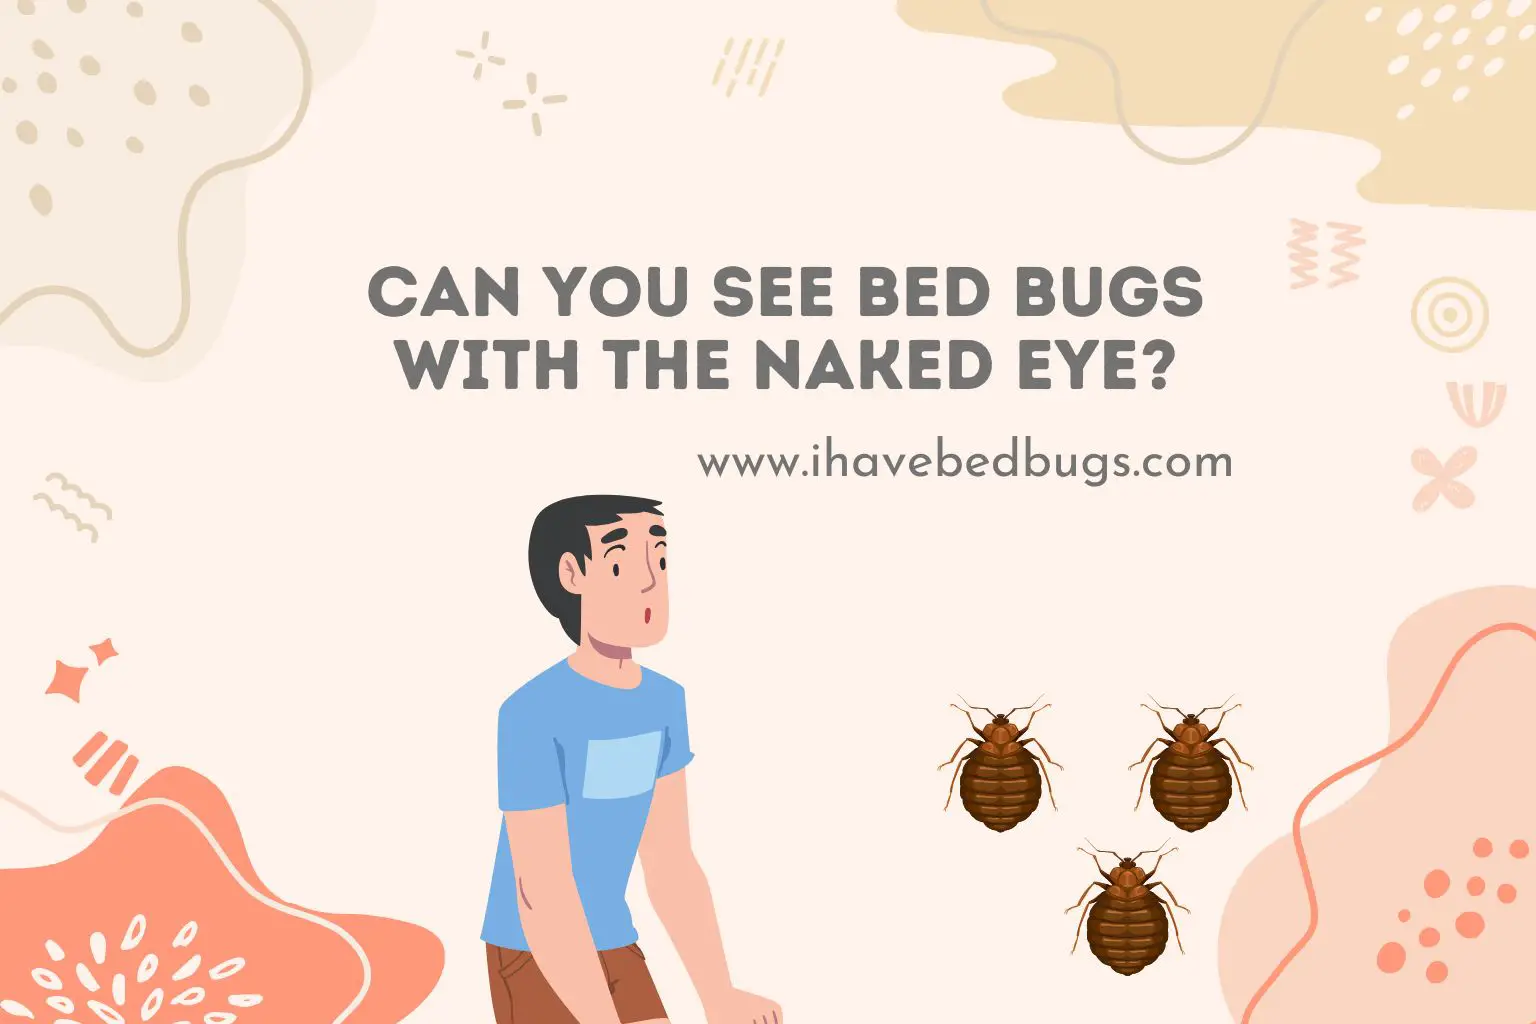 Can you see bed bugs with the naked eye